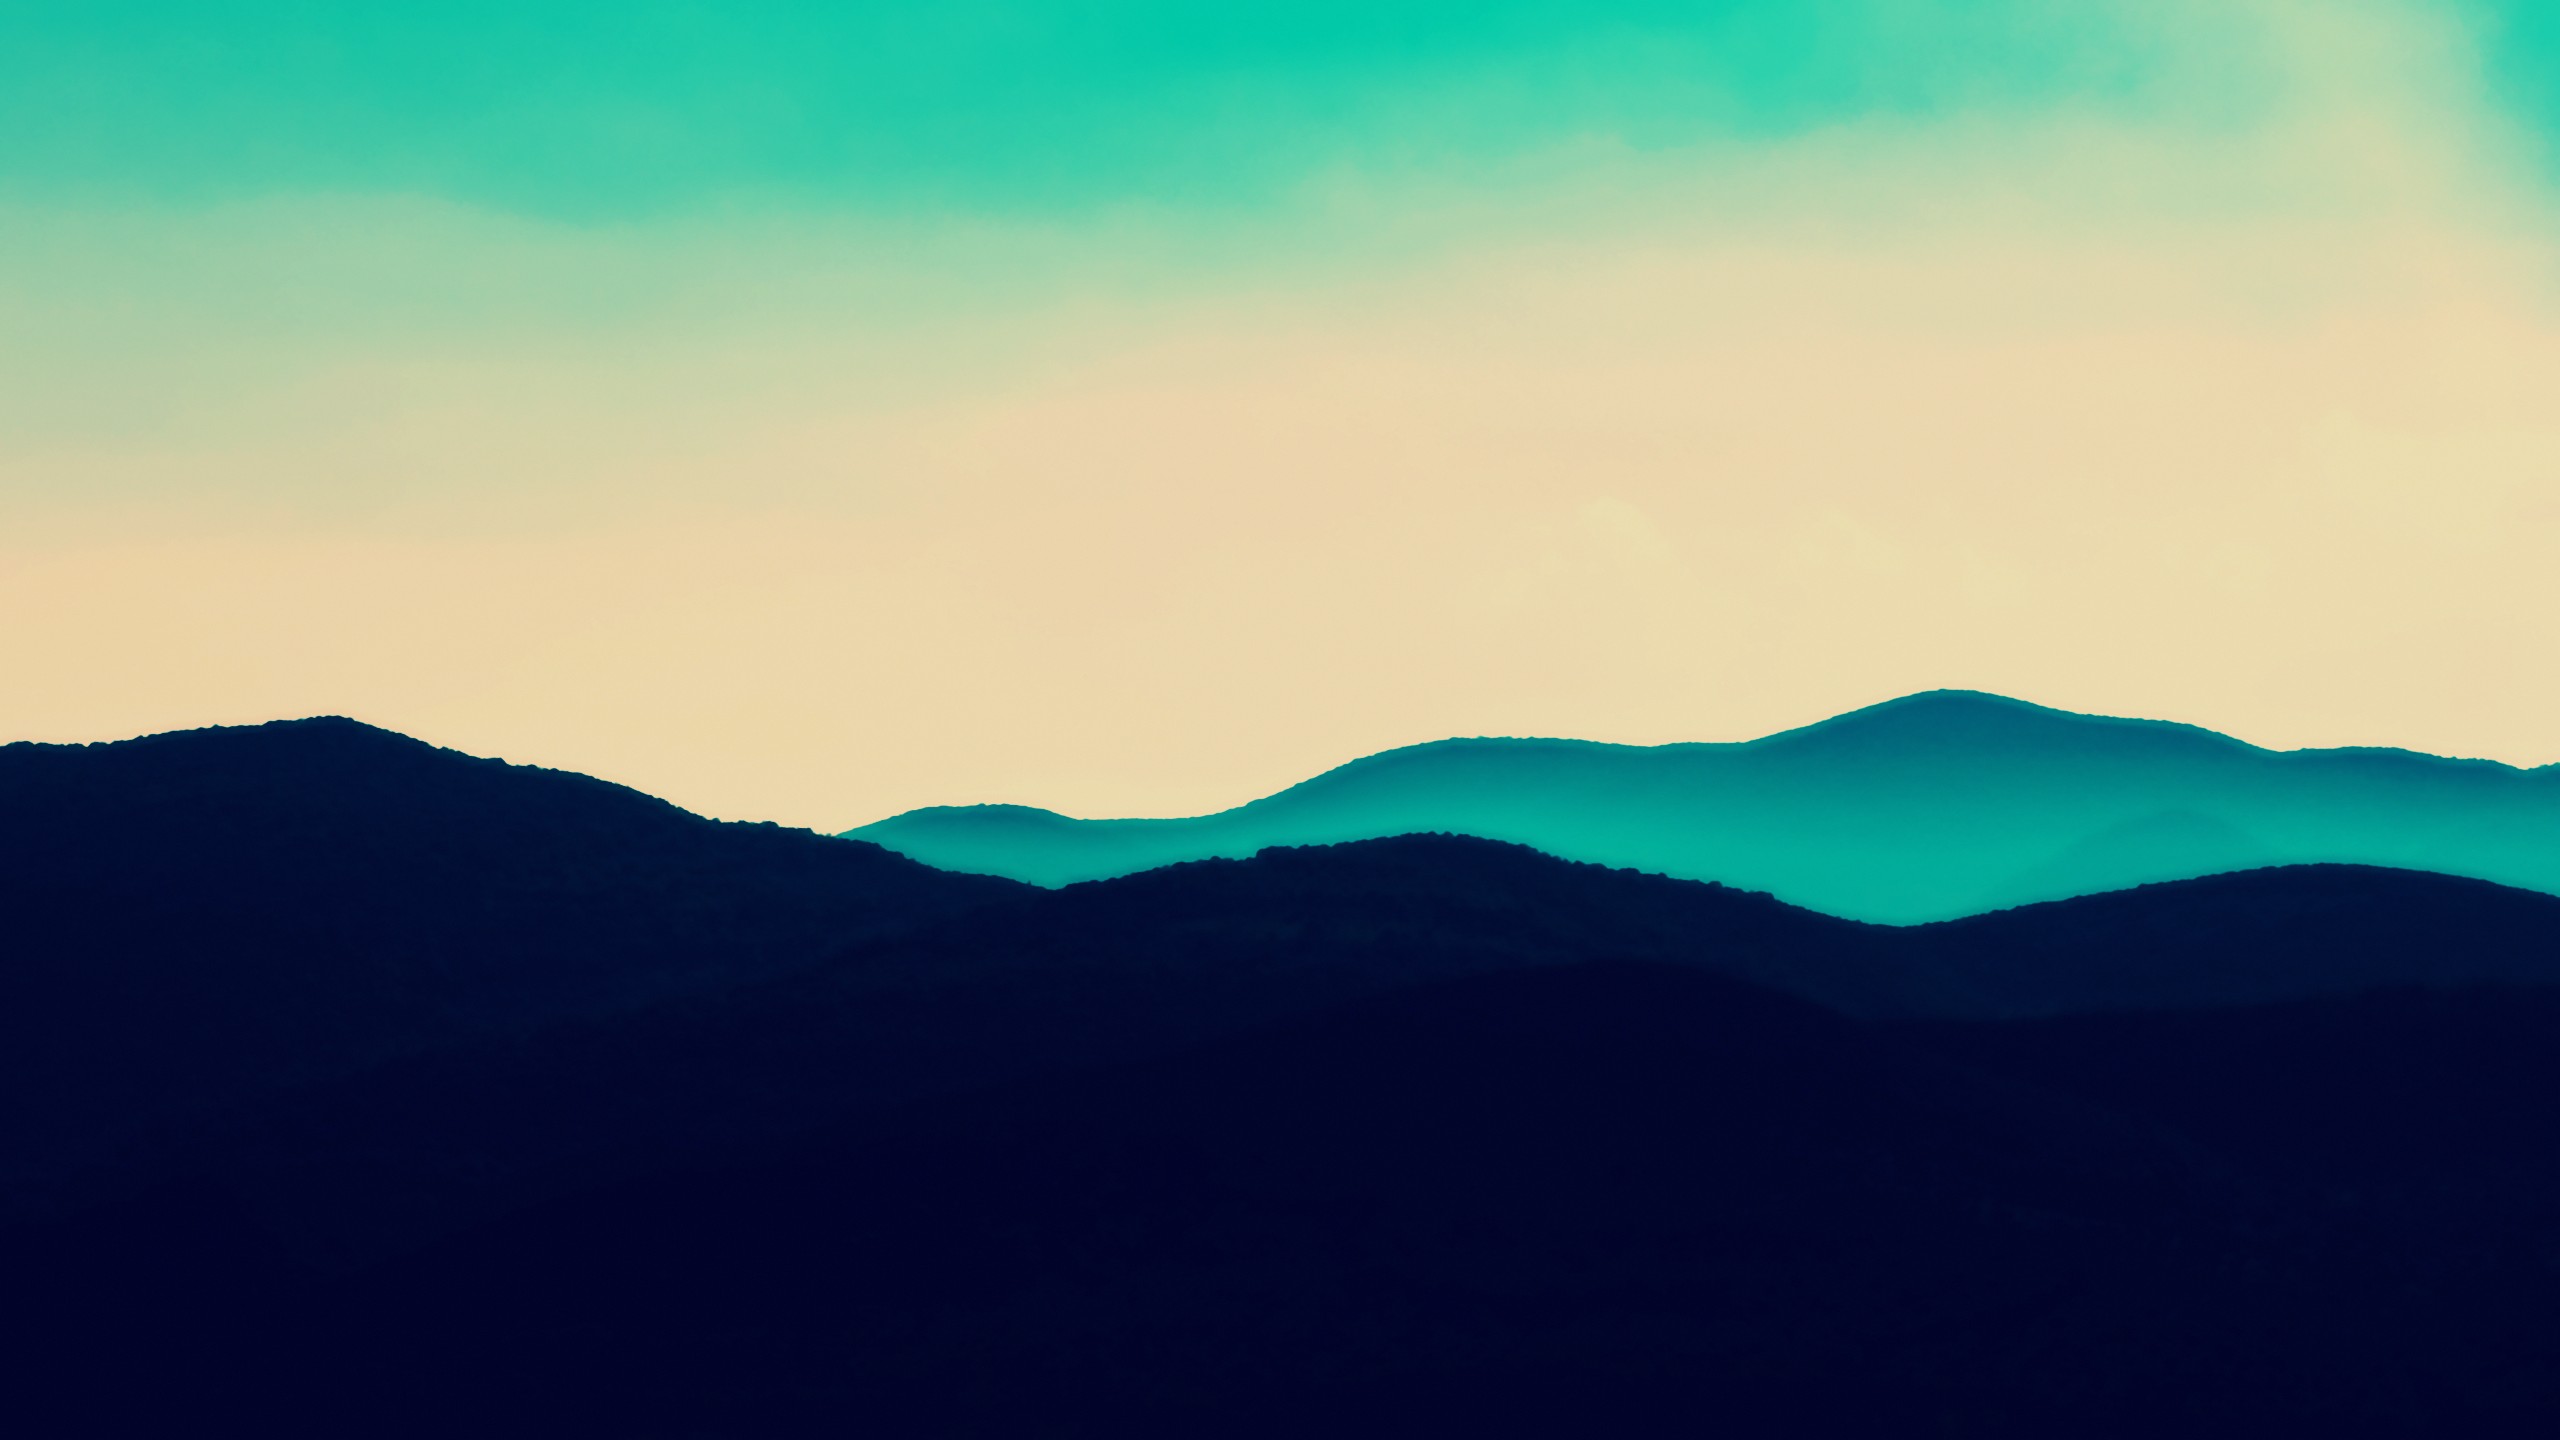 landscape, Hills, Mountains, Bright, Blue, Skye, Clouds, Turquoise Wallpaper